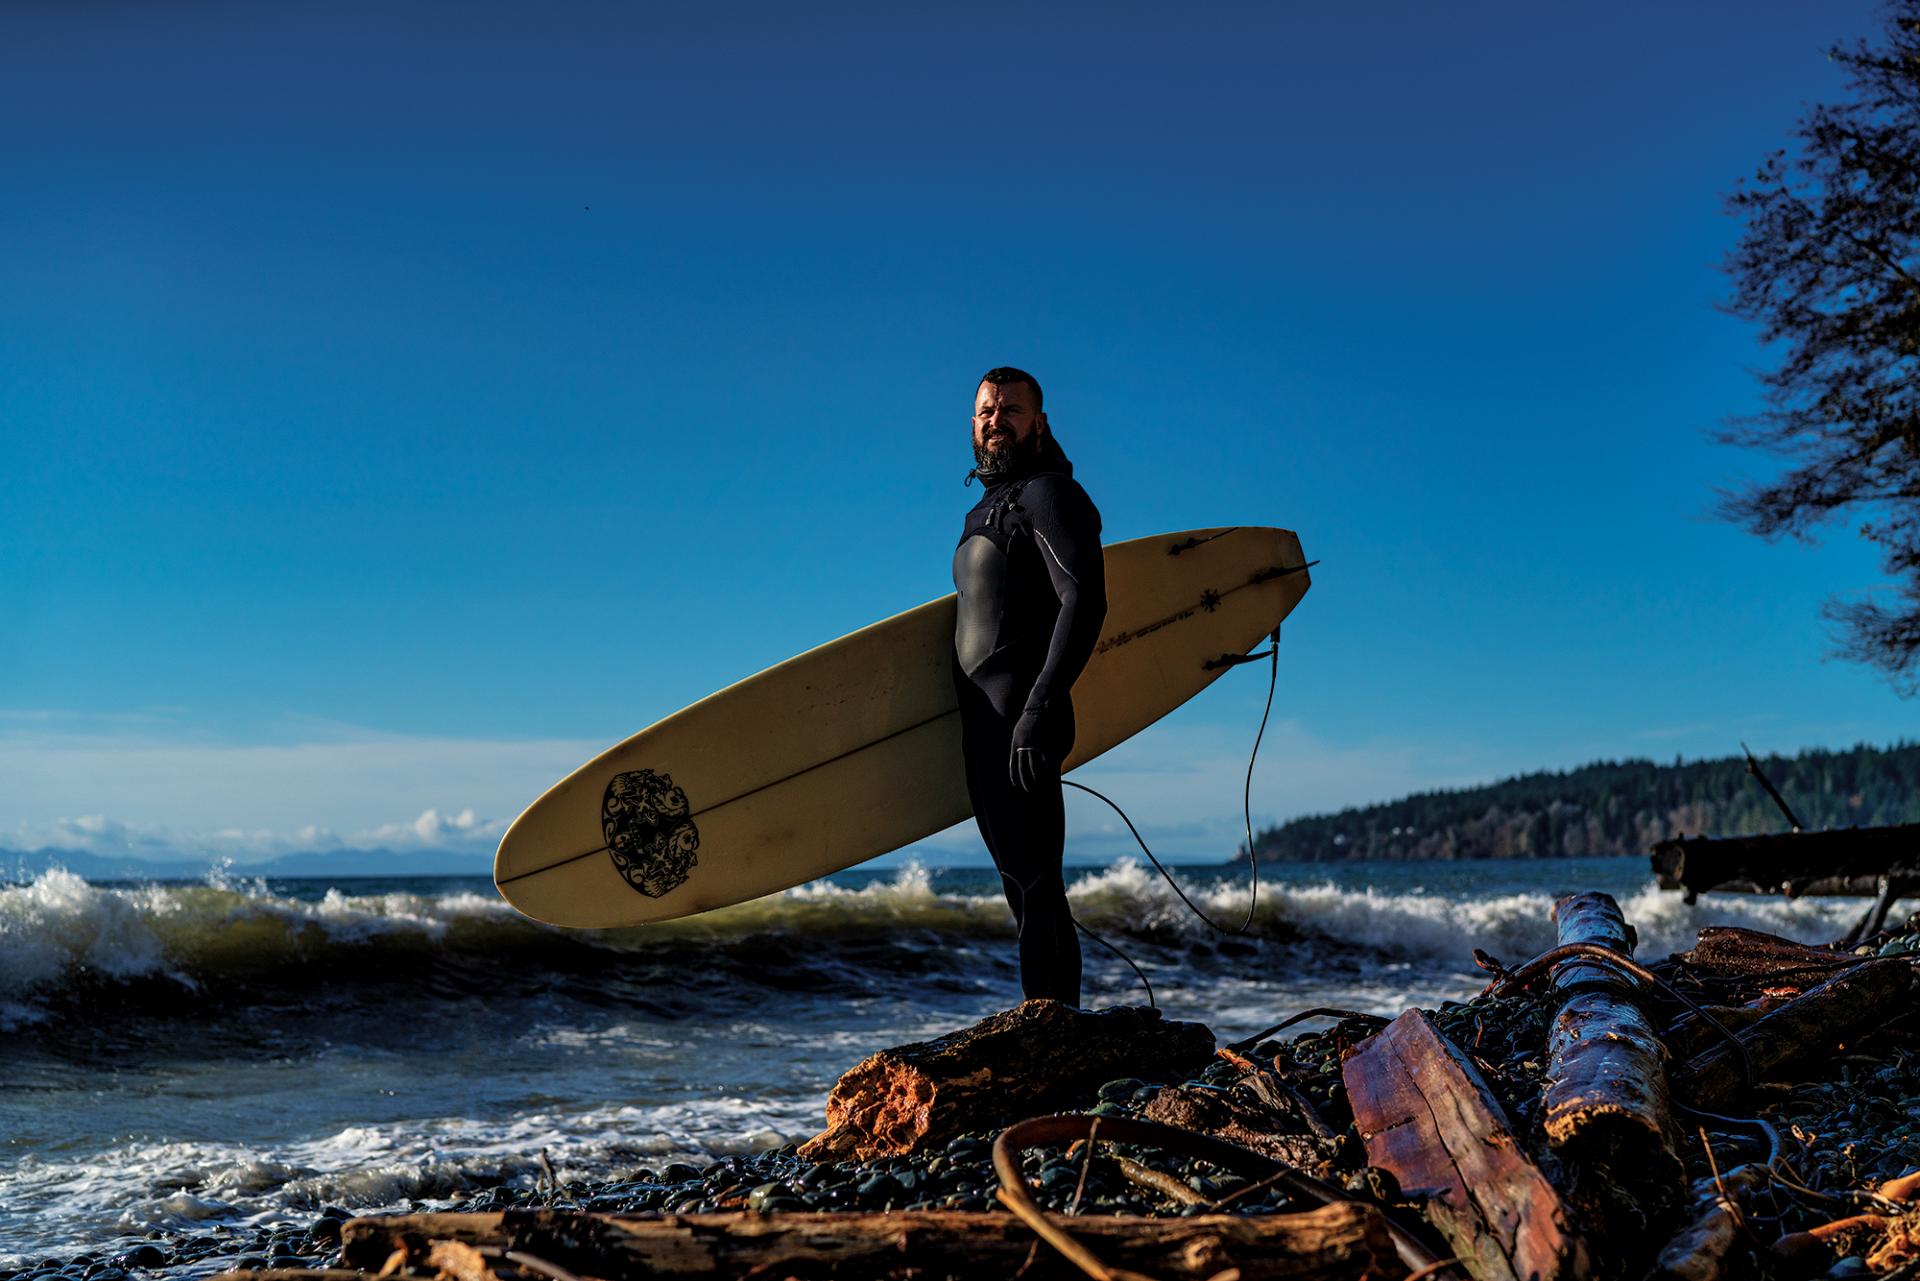 Weekend Warrior: The Surf Is Often Up For Jason Macisaac photo